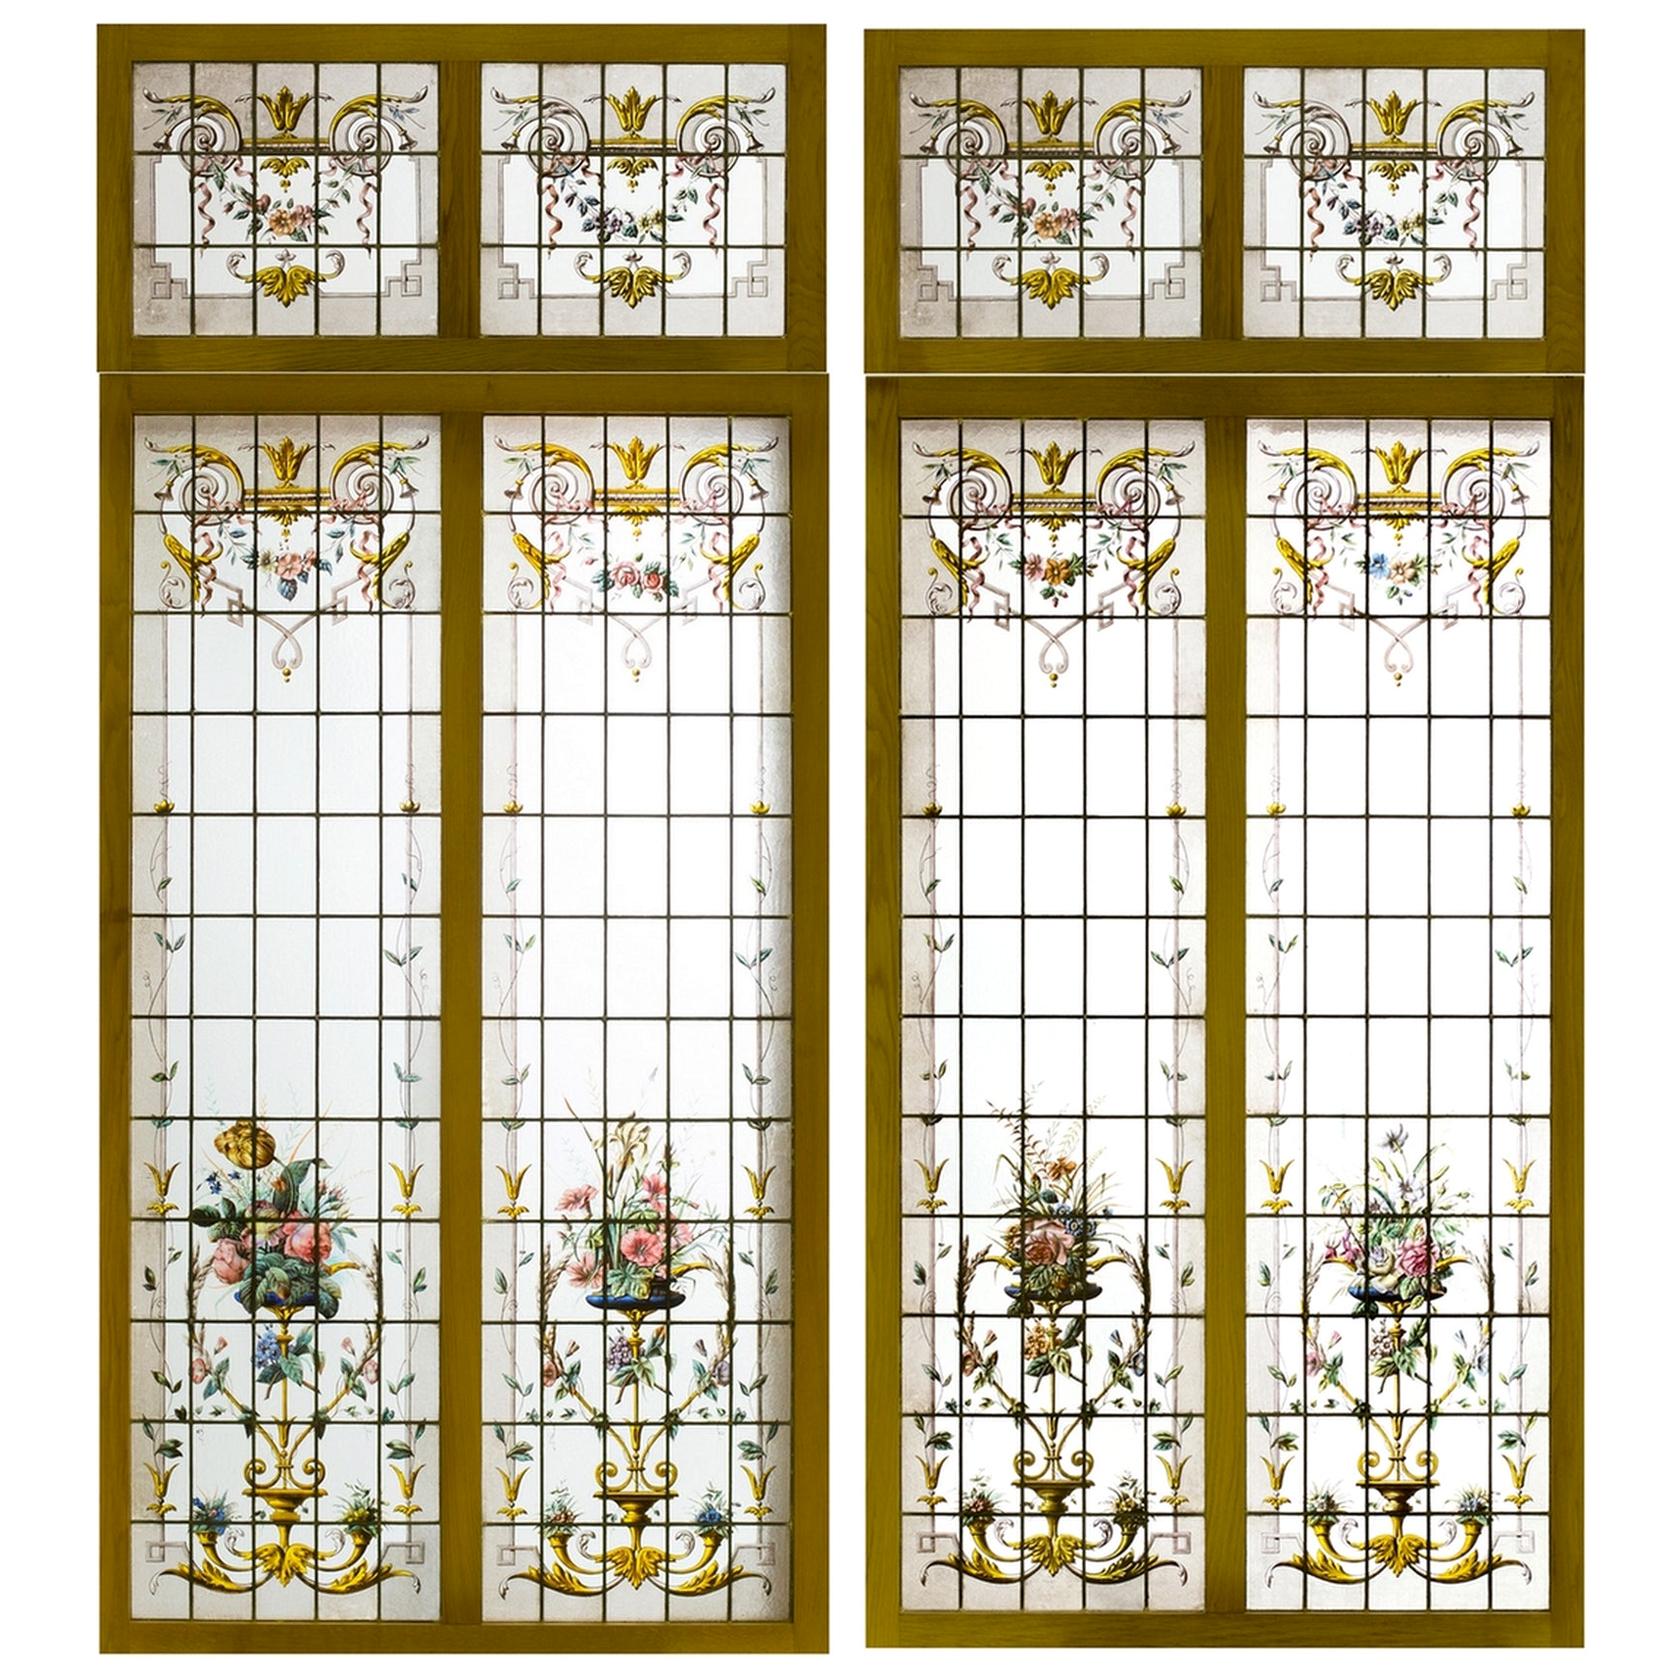 Pair of Double Stained Glass Windows and Their Transoms, circa 1880